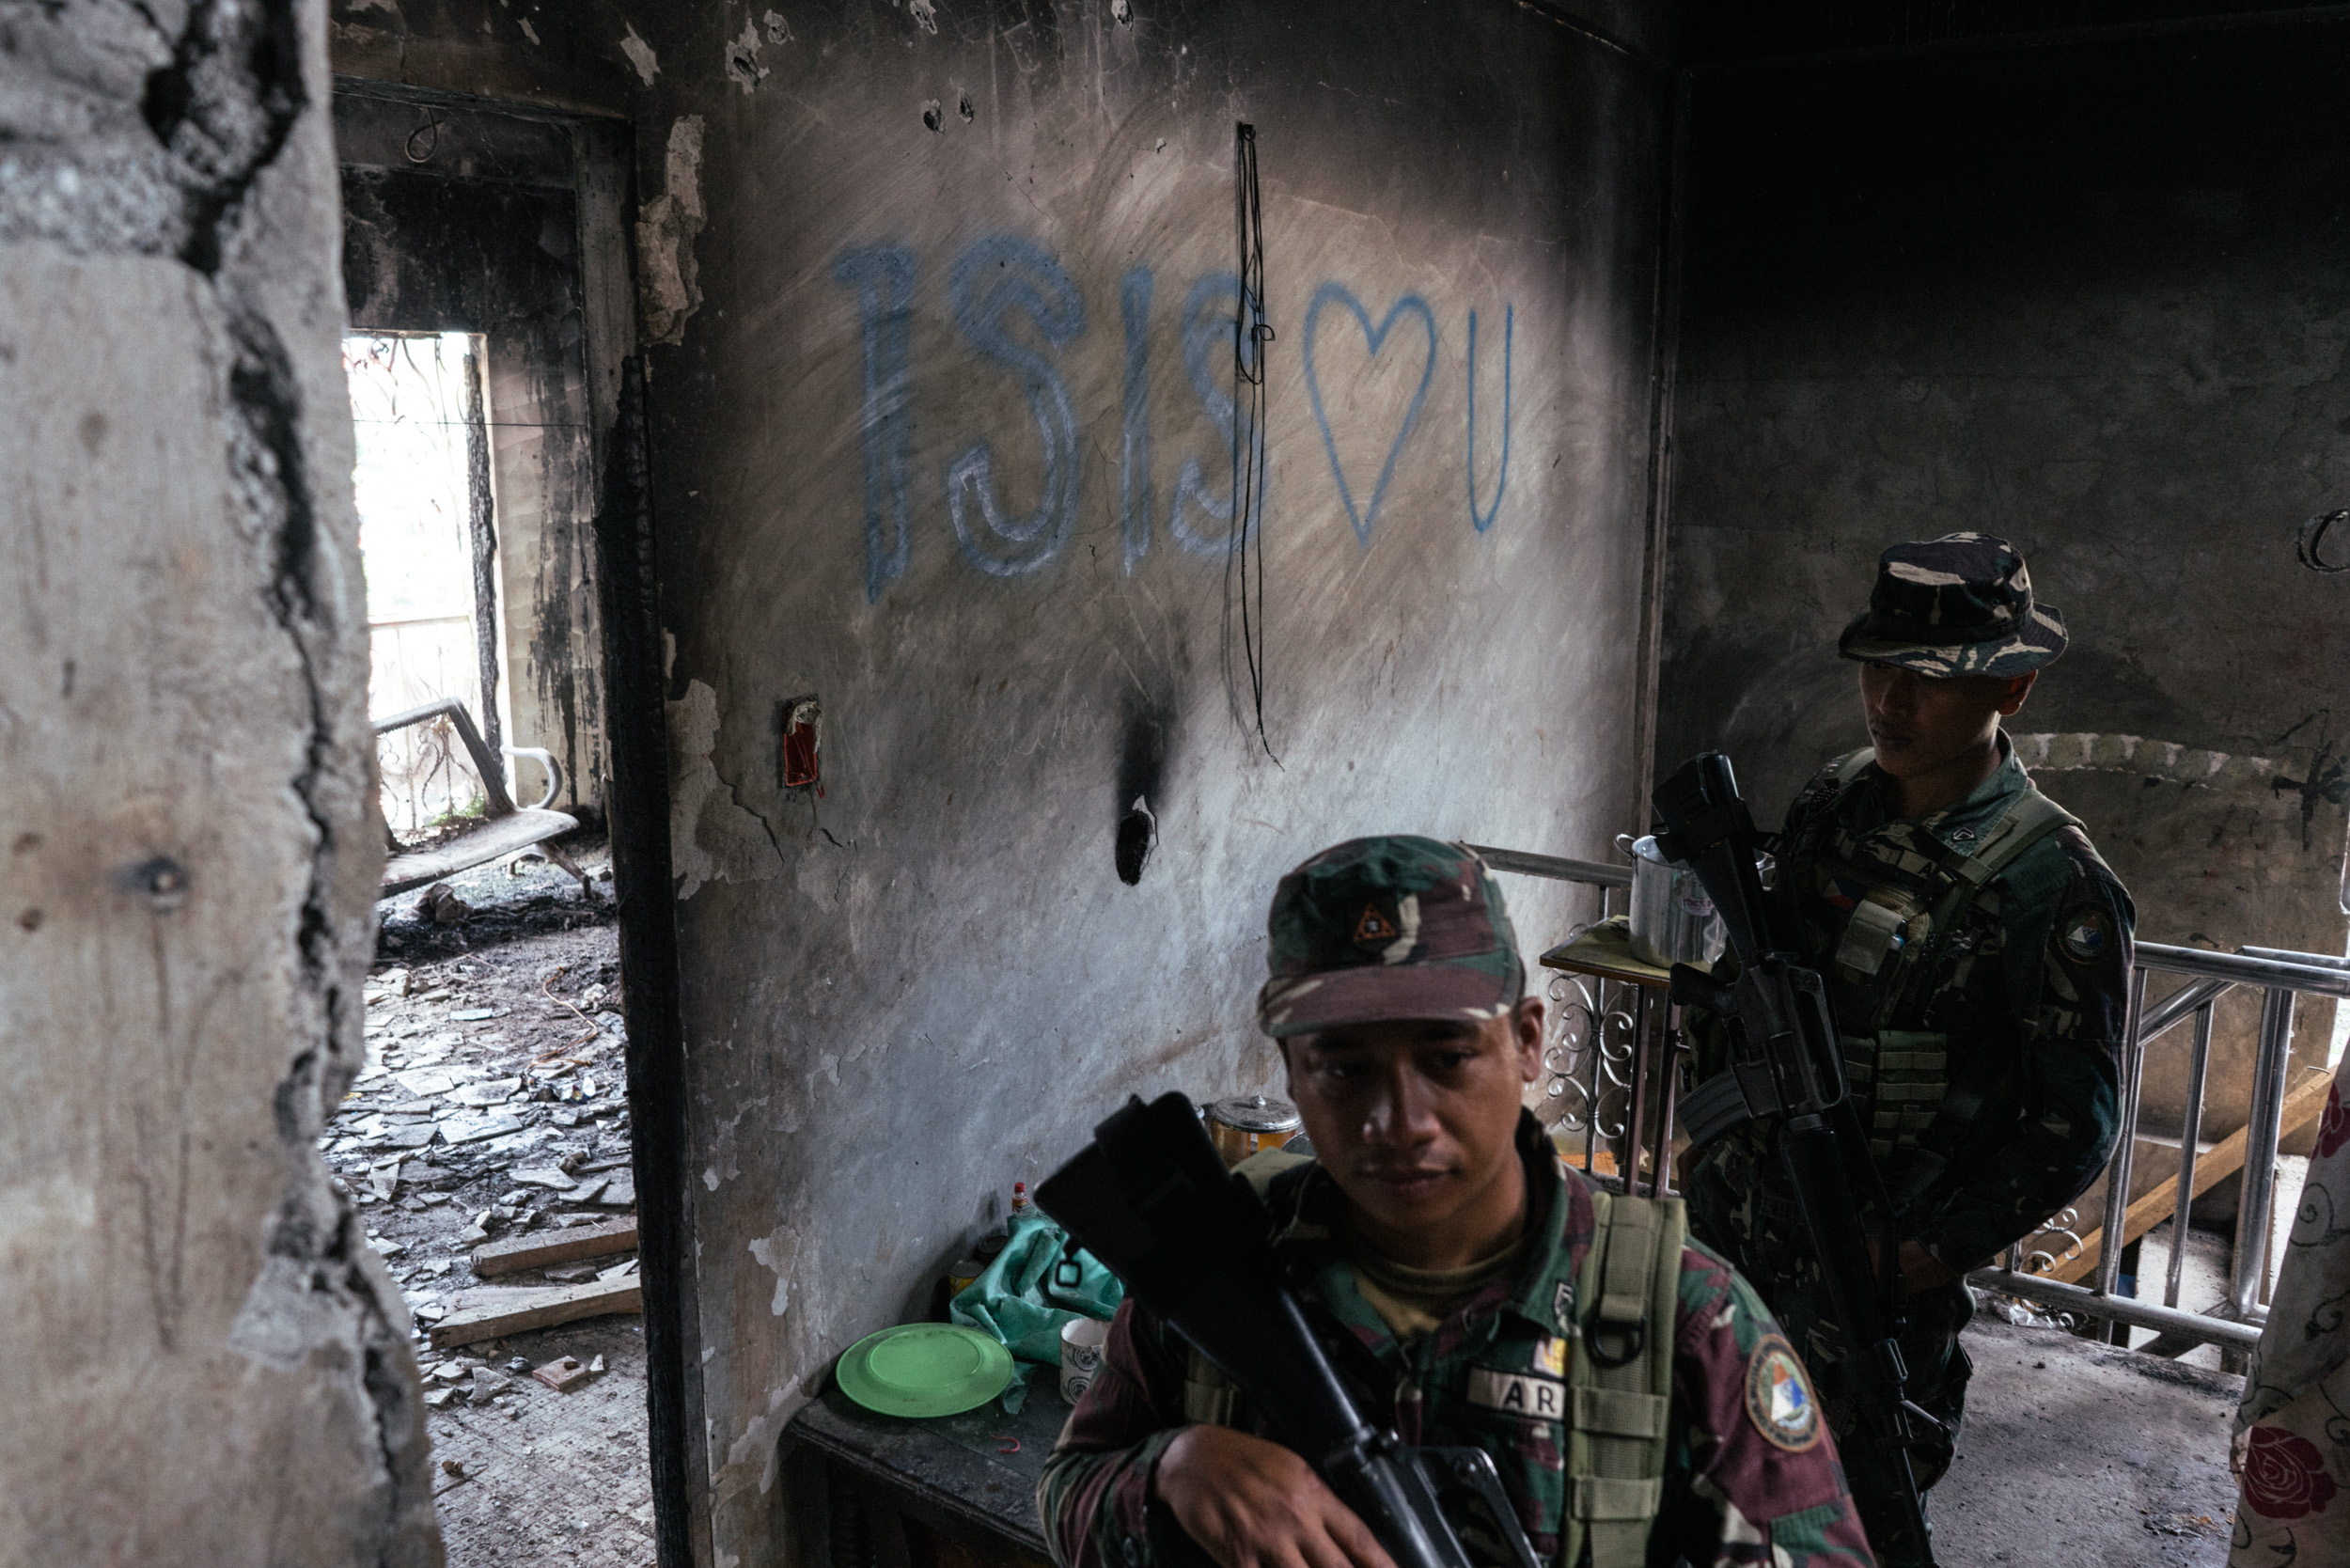  Filipino soldiers are seen by a wall with the graffiti 'ISIS ❤ U' in Marawi, Philippines on November 15, 2017. Marawi City is in ruins after Islamic State (IS) inspired militants laid siege to the city in a battle that lasted for five months, displa